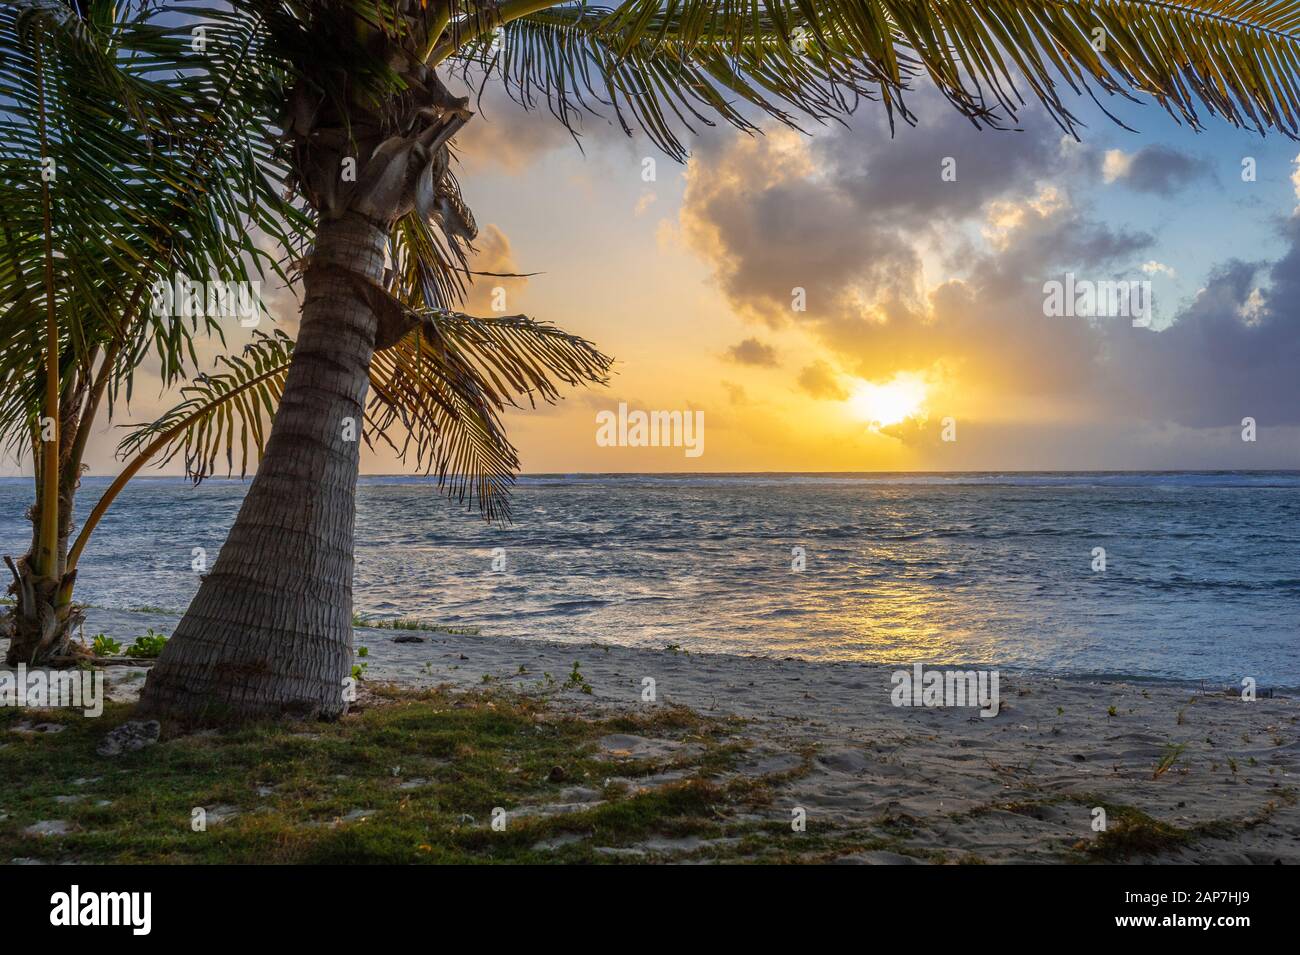 Palm trees and sandy beach at sunrise, perfect tropical location, Grand Cayman Island Stock Photo